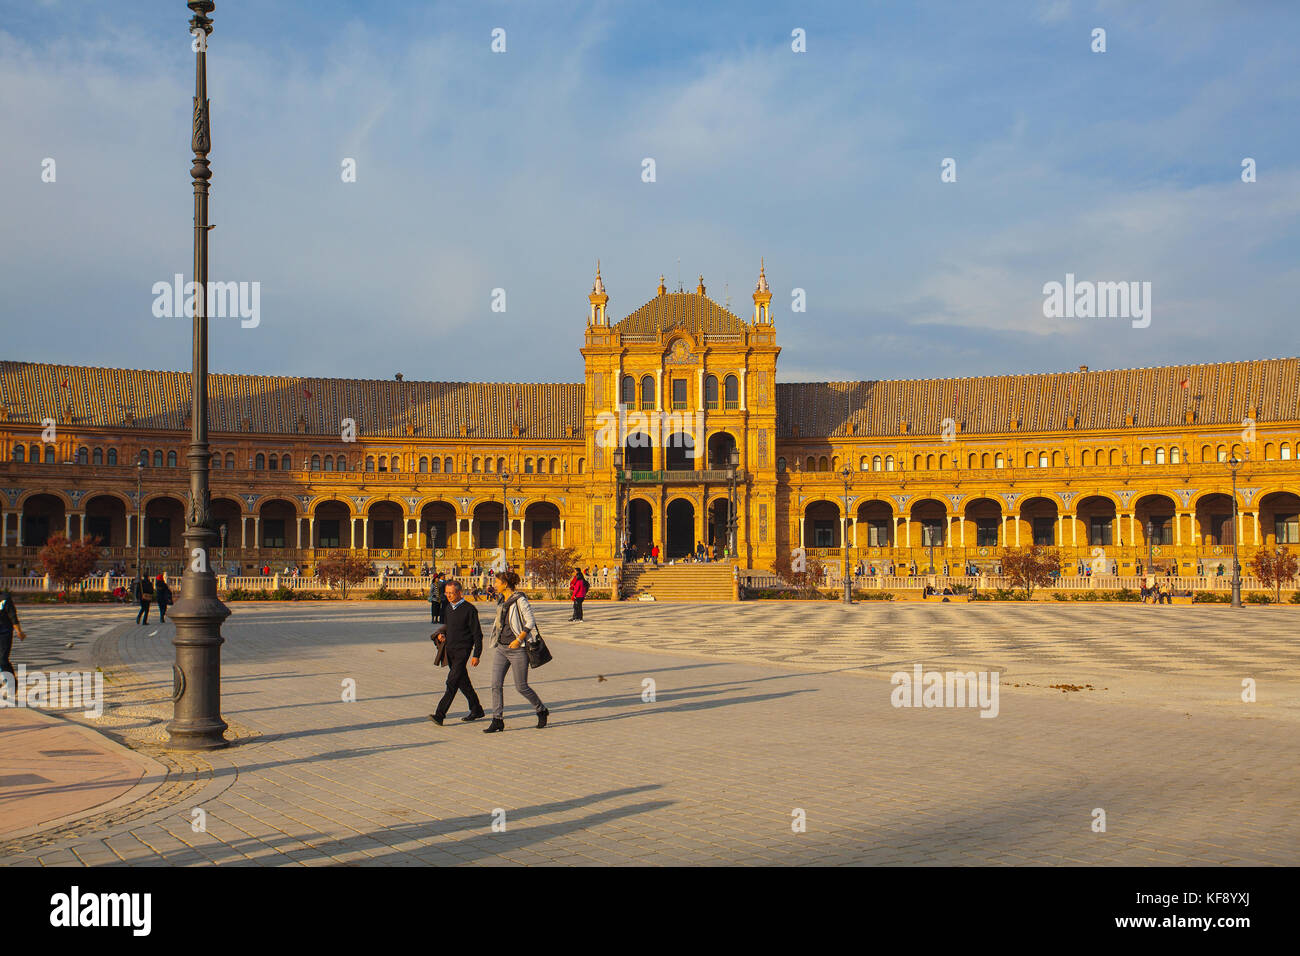 Seville, Spain - November 18,2016:  View of Plaza de Espana complex, built in 1929, is a huge half circle with a total area of 50,000 square meters Stock Photo